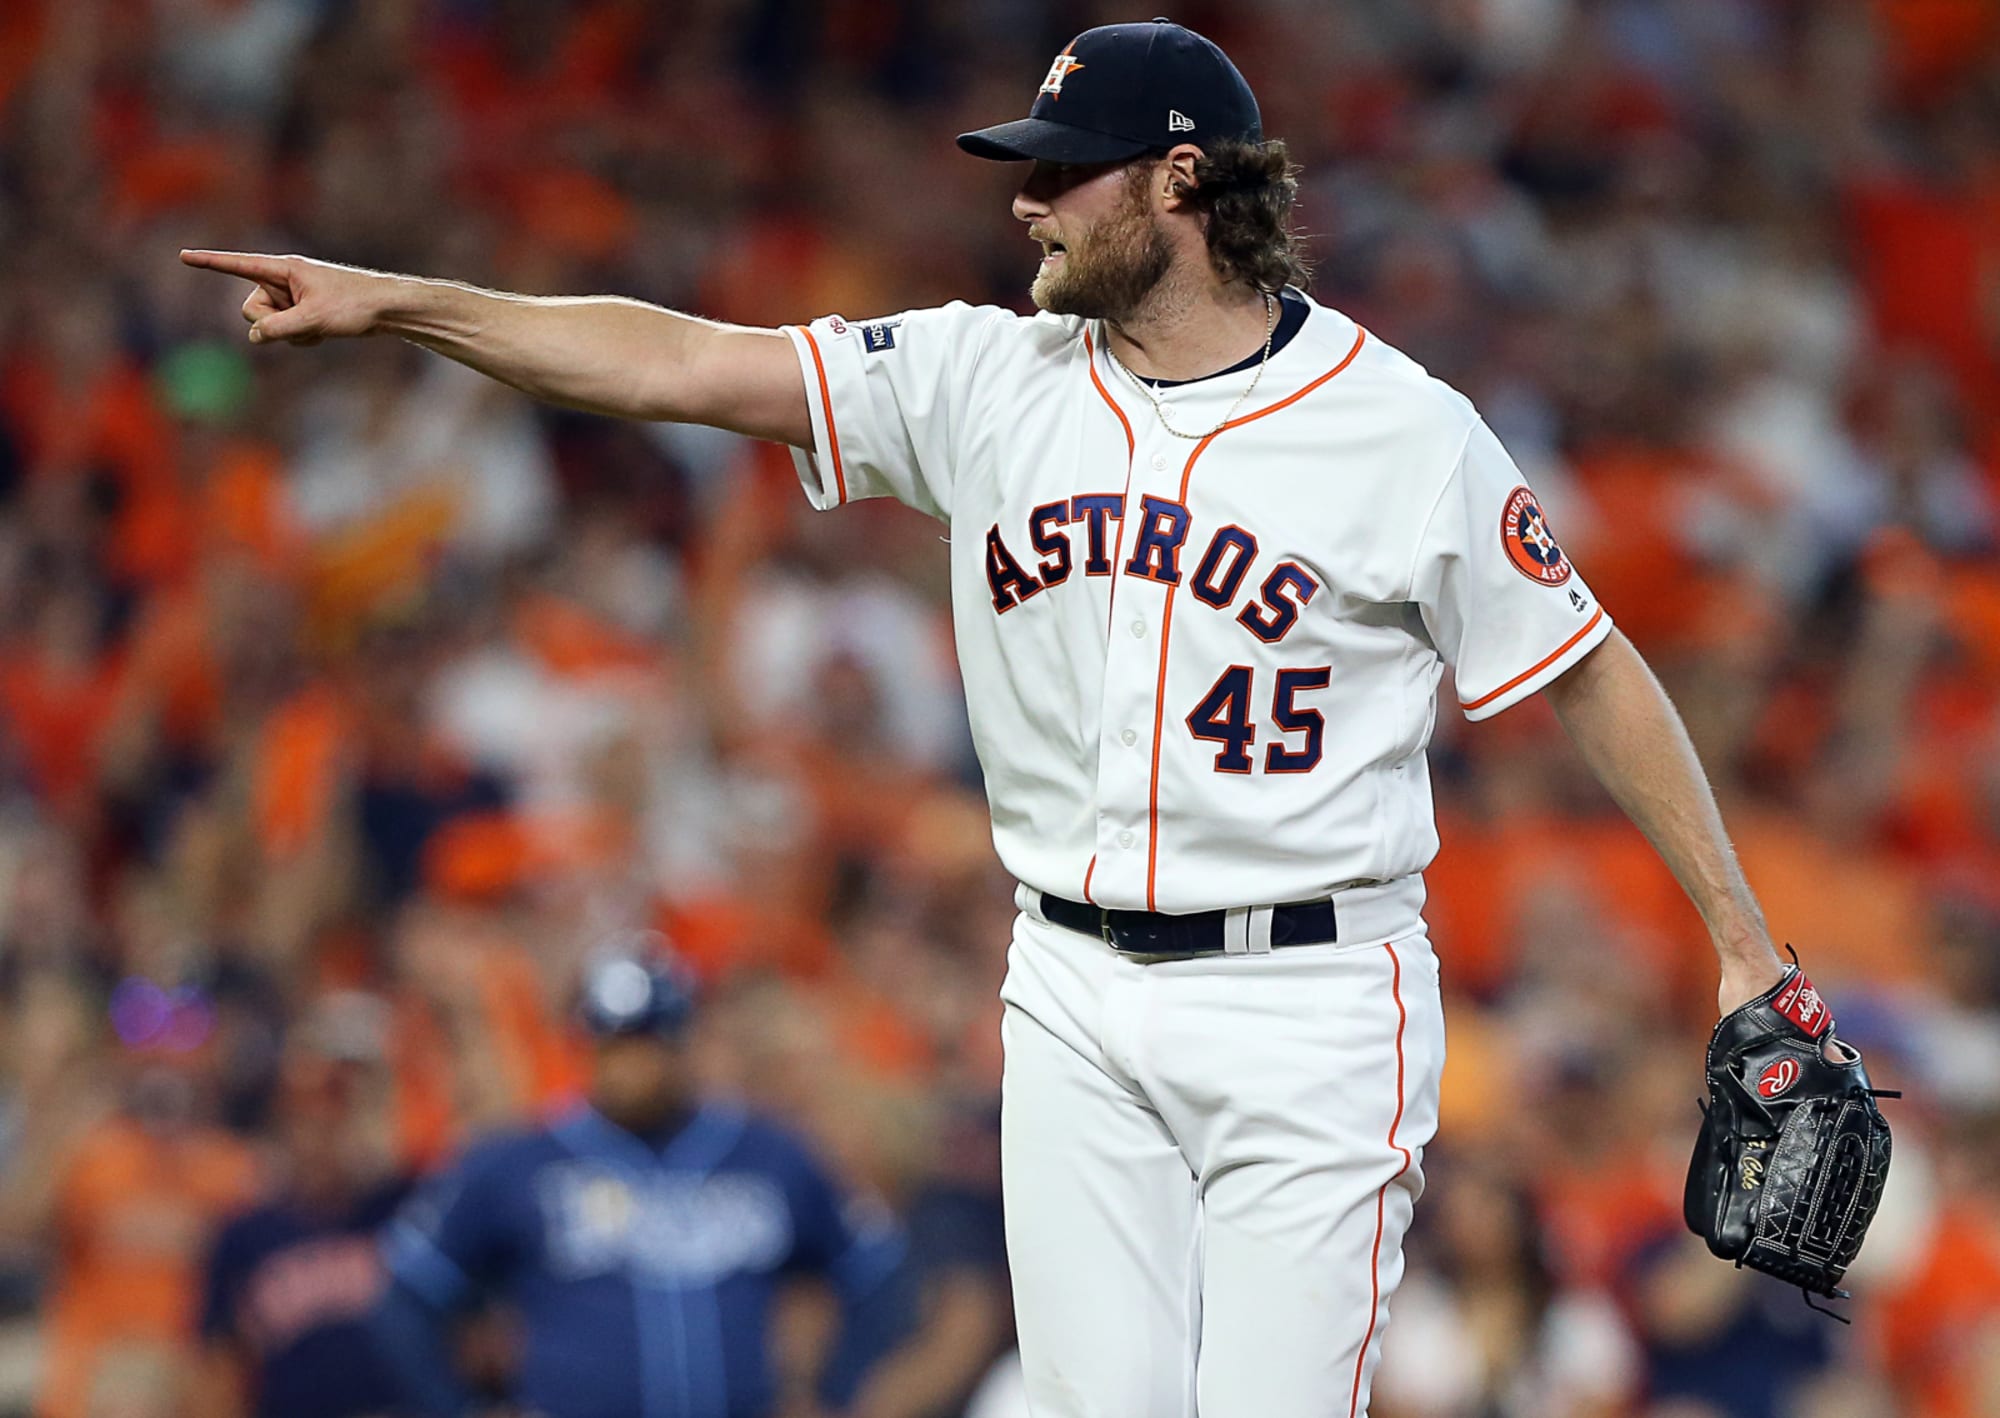 New York Yankees land Gerrit Cole with massive deal